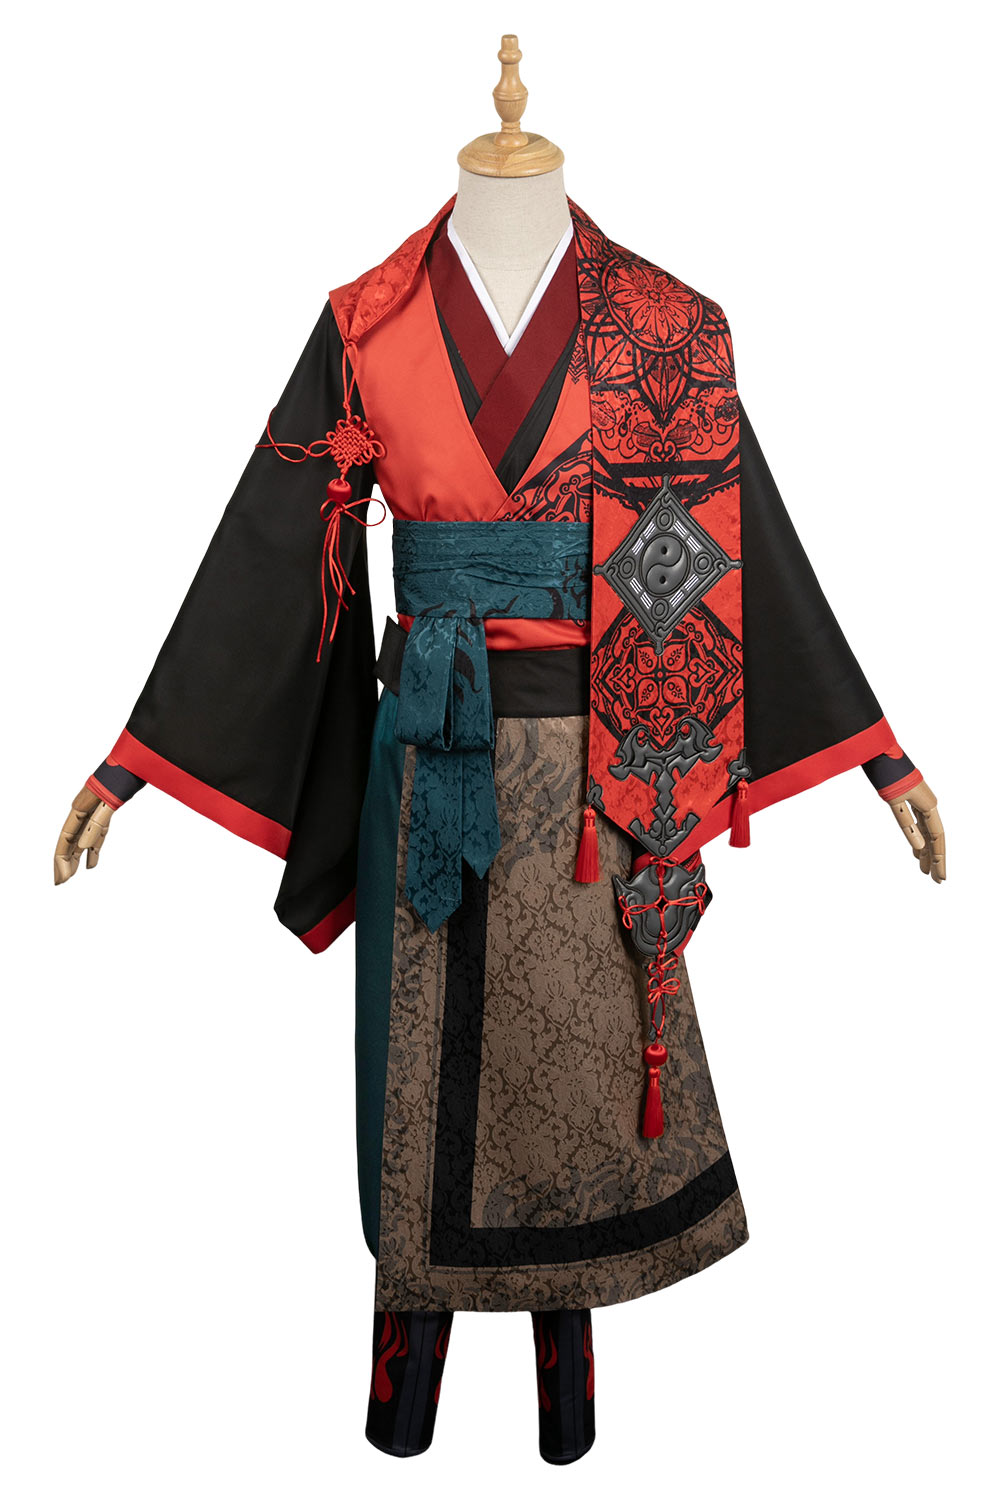 Game Fate/Samurai Remnant Zheng Chenggong Outfits Halloween Carnival Suit Cosplay Costume